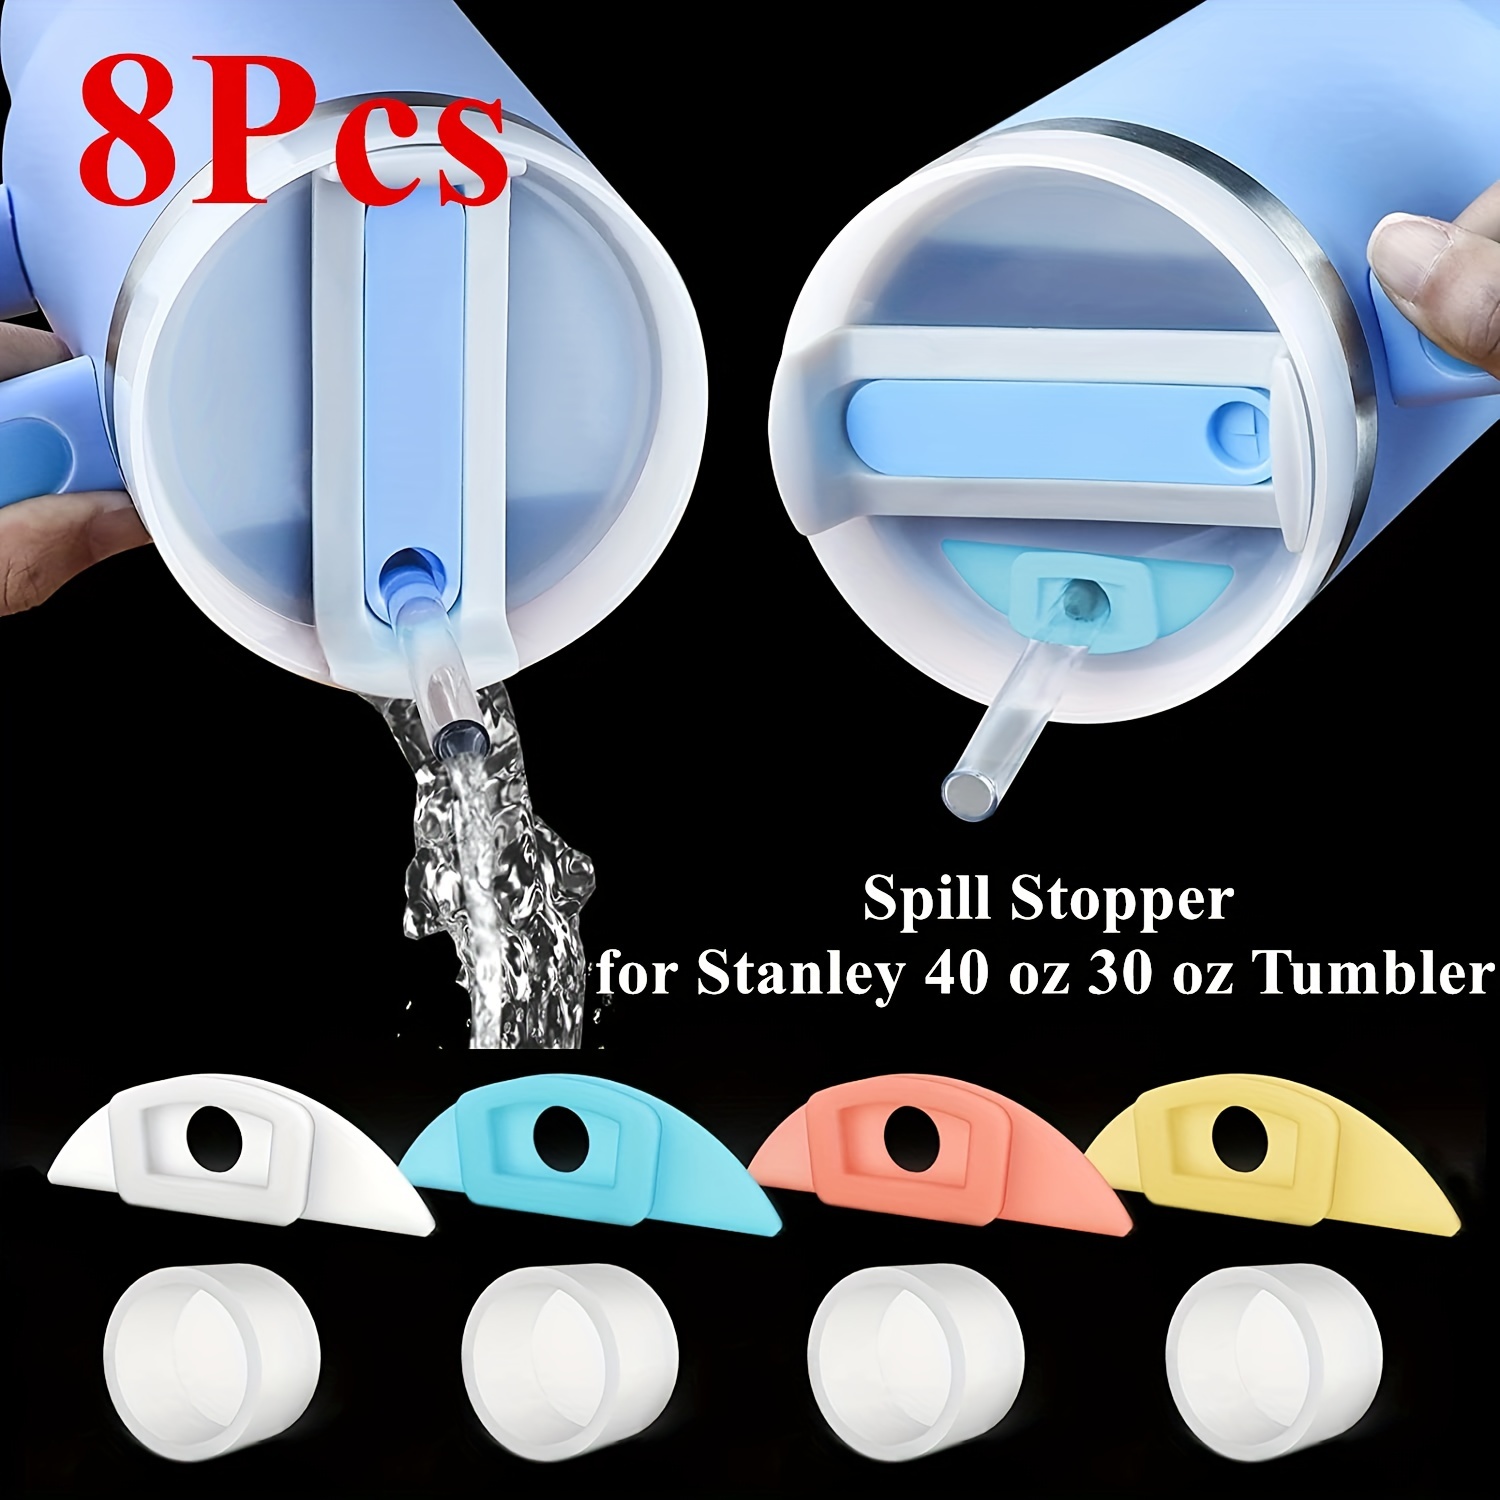 3pcs/6pcs Food Grade Silicone Stanley Cup Spill Stopper Dust-proof White  Spill Proof Stopper Set Nontoxic Leak-proof Mug - AliExpress